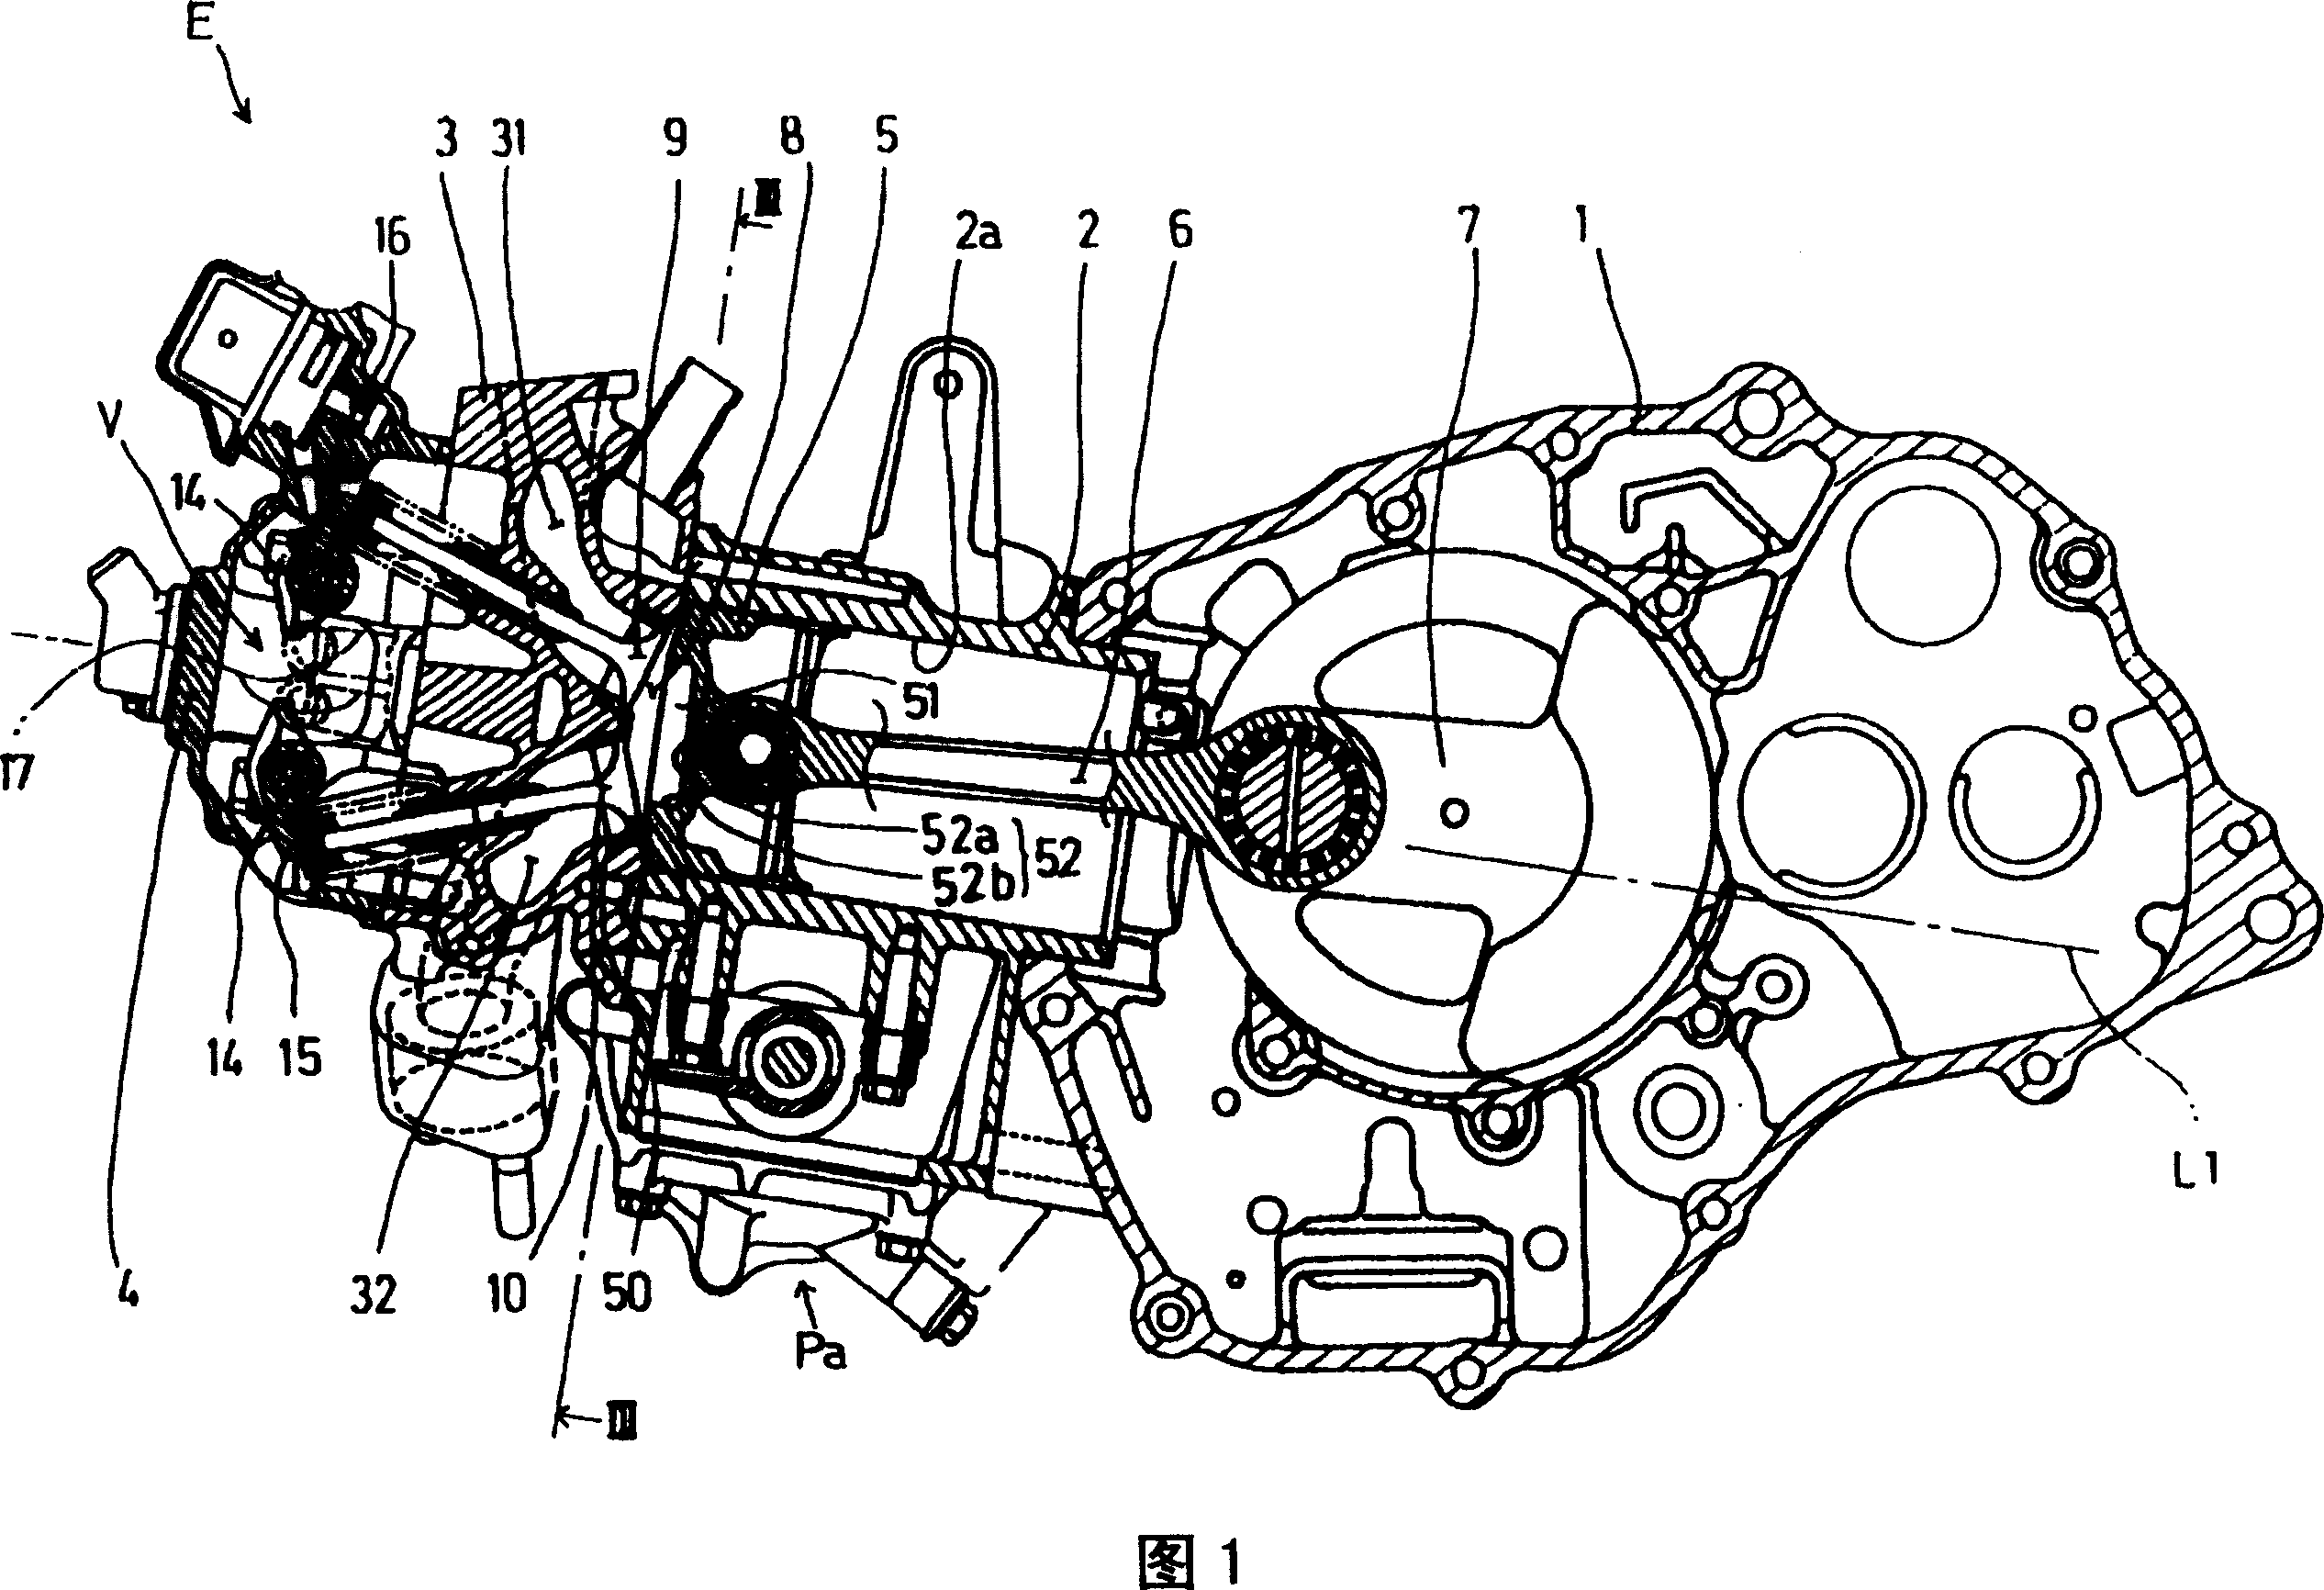 In cylinder fuel oil jet type IC engine